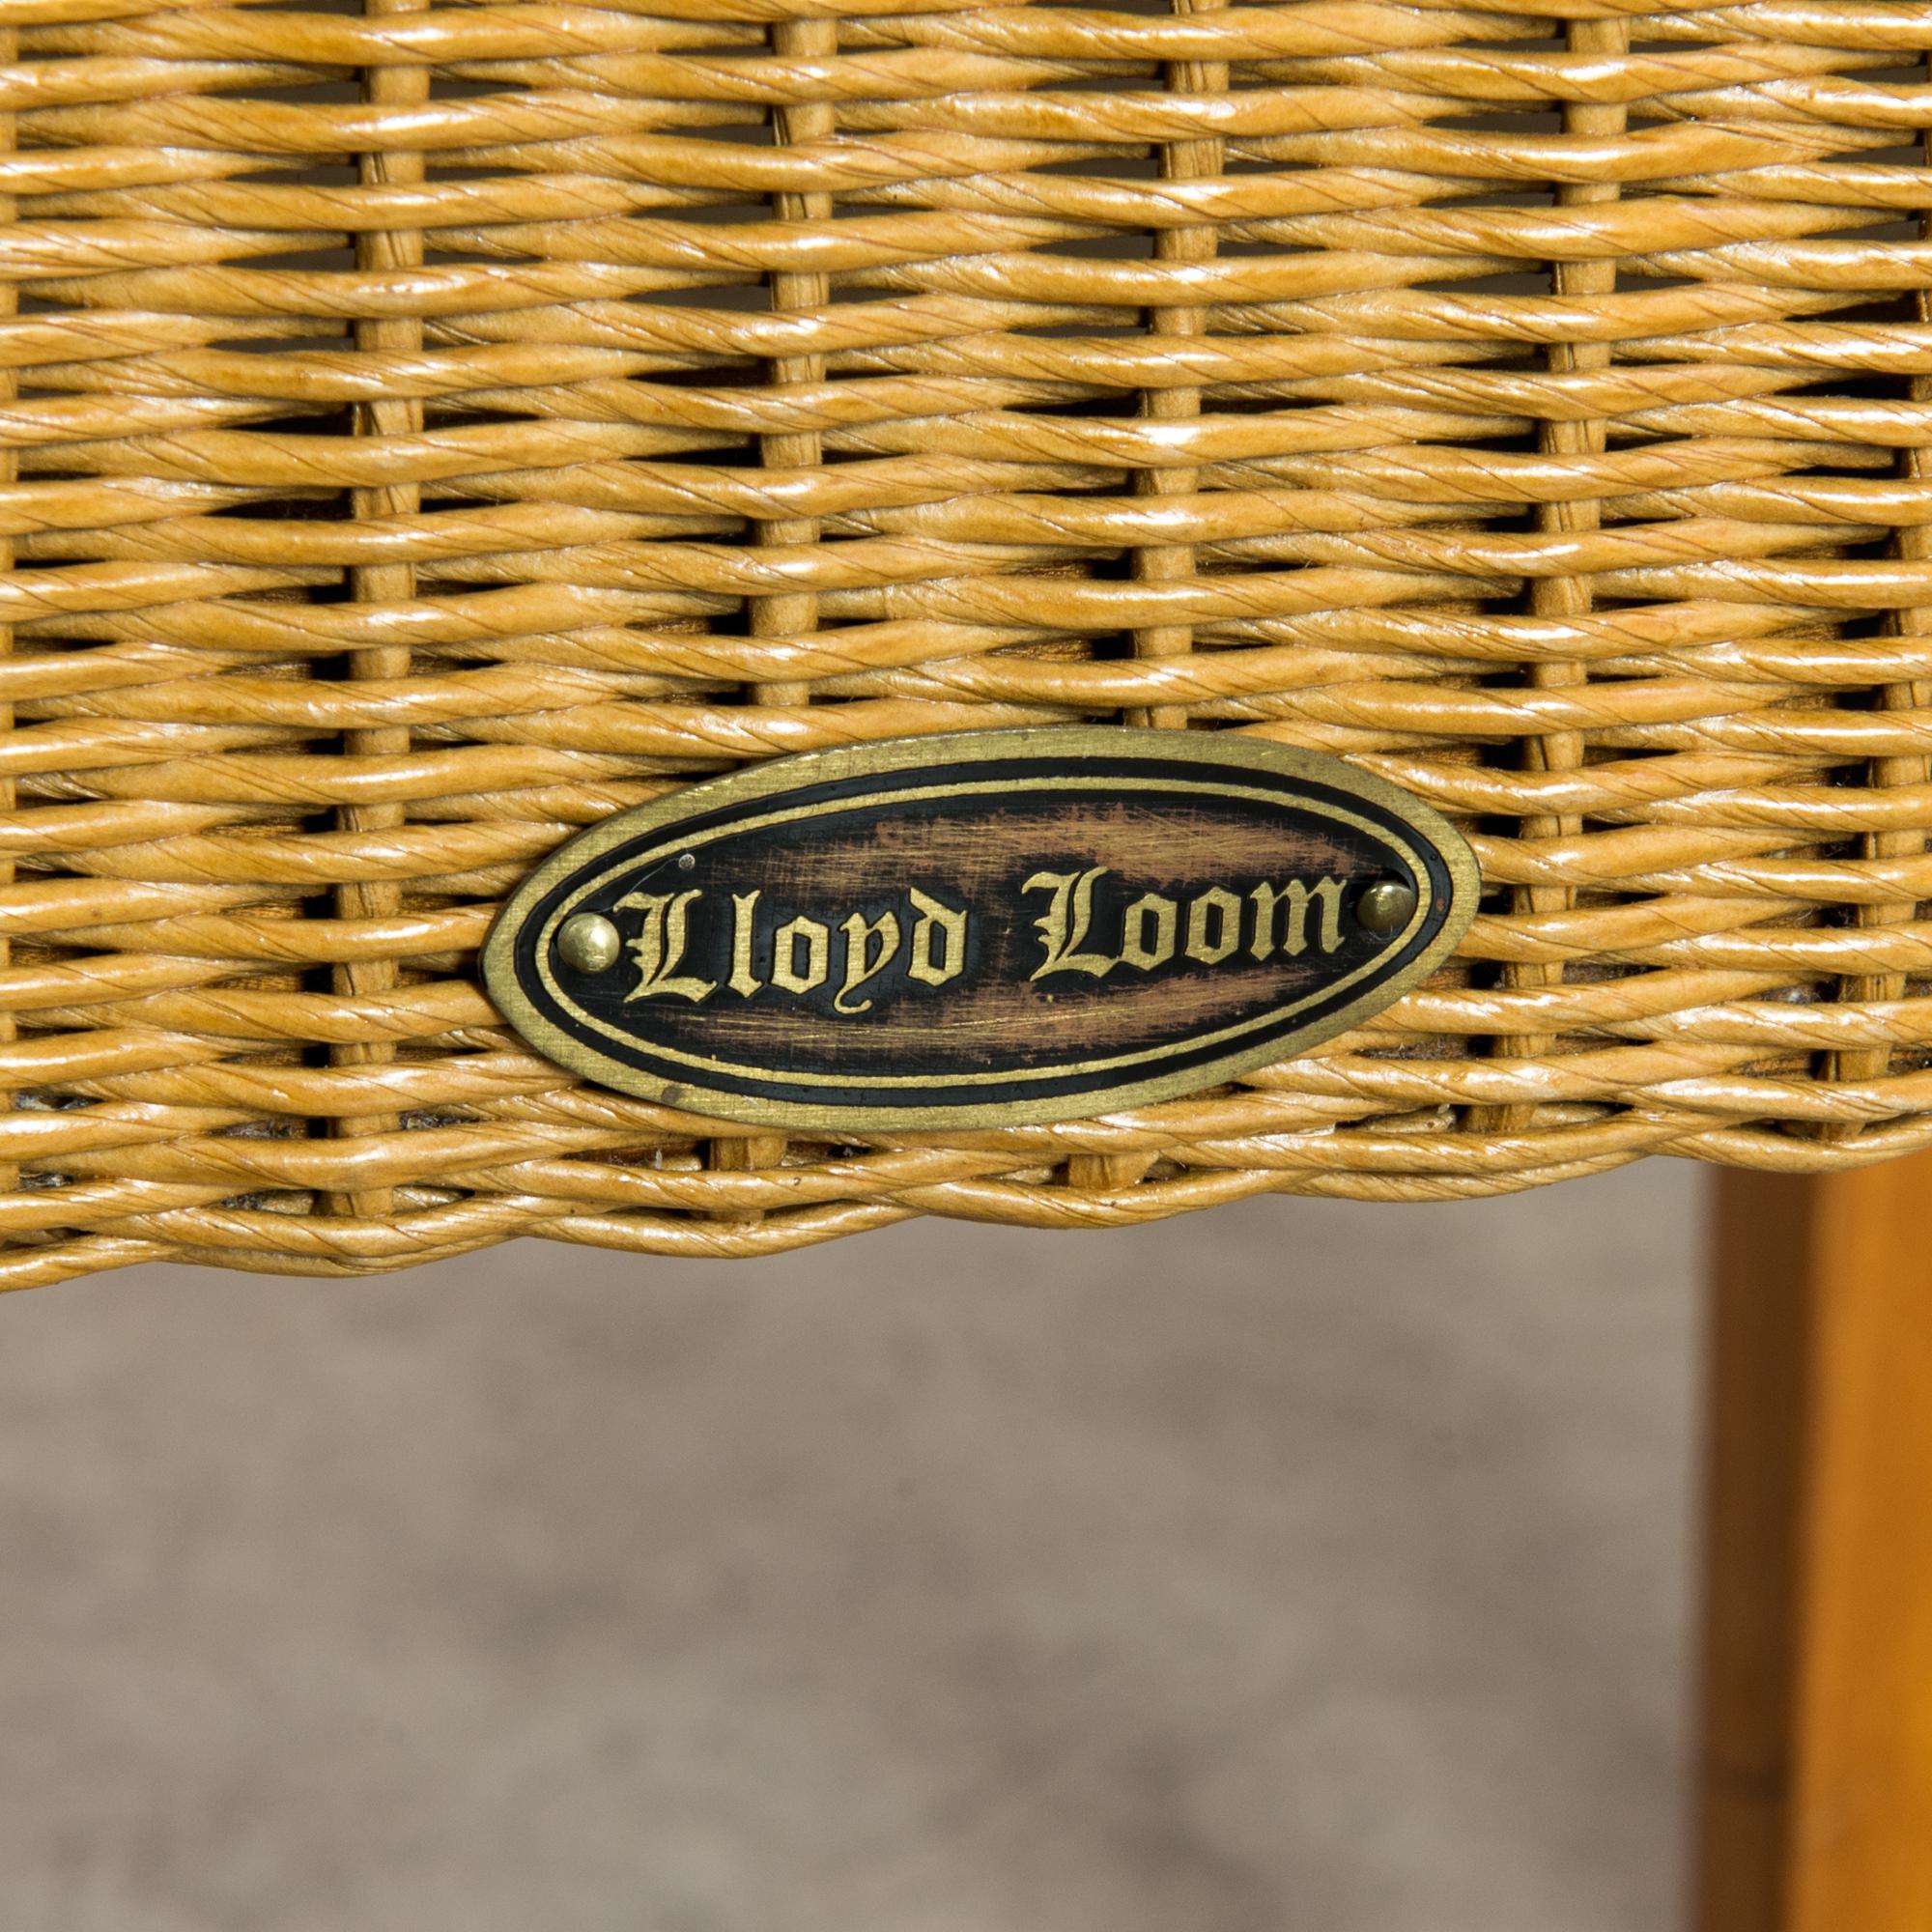 This set of eight dining chairs with tapered legs and full backs was made in the United Kingdom, circa 1980. They are manufactured by Lloyd Loom, which developed an innovative technique of twisting kraft paper around steel wires. Woven sheets of the